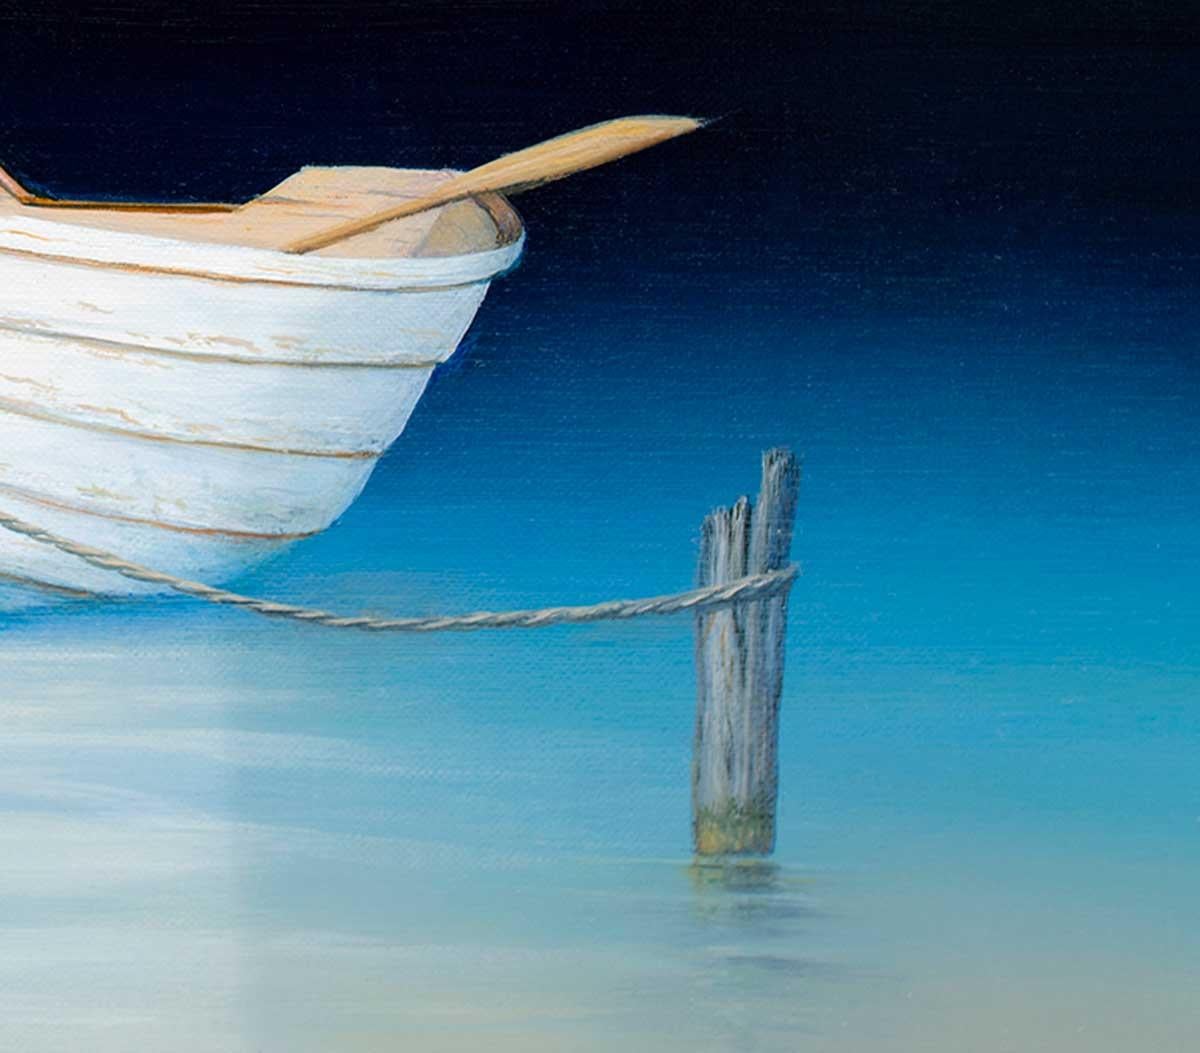 This coastal Limited Edition print by Daniel Pollera features a white row boat with two ores resting on either side of the boat's edge. It is tied to a wooden post in the water with a rope, floating on serene blue water which fades to nearly black